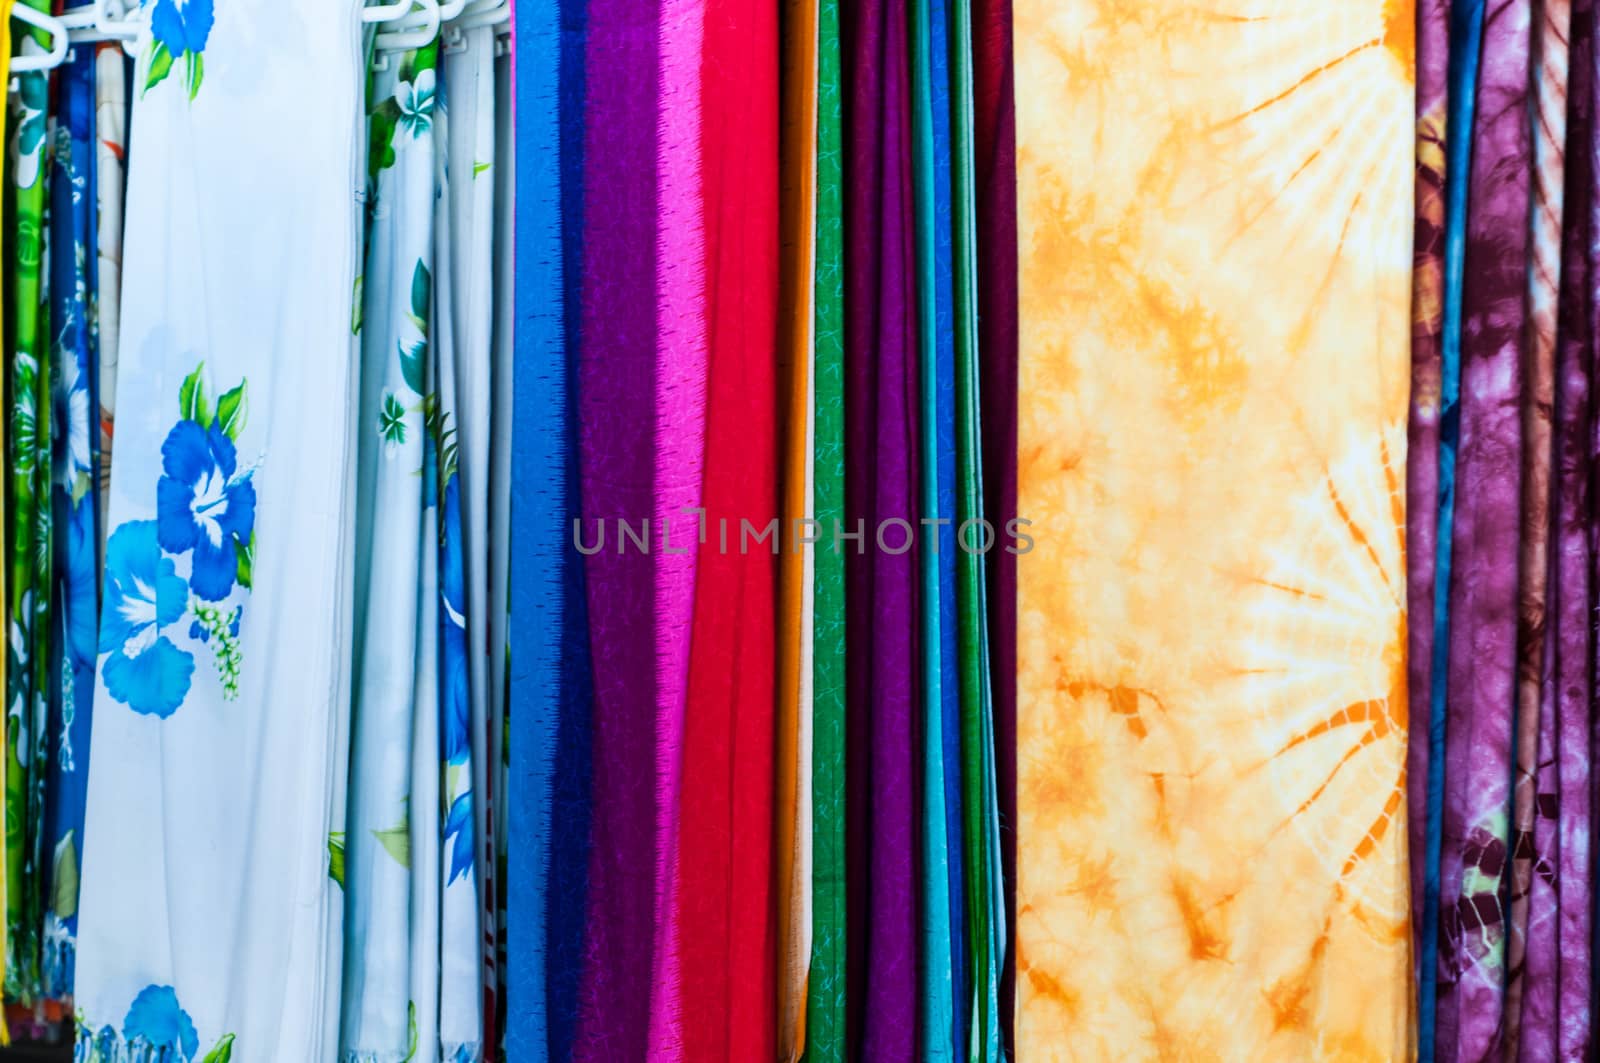 Stack of colorful fabric. Red, white, yellow, blue